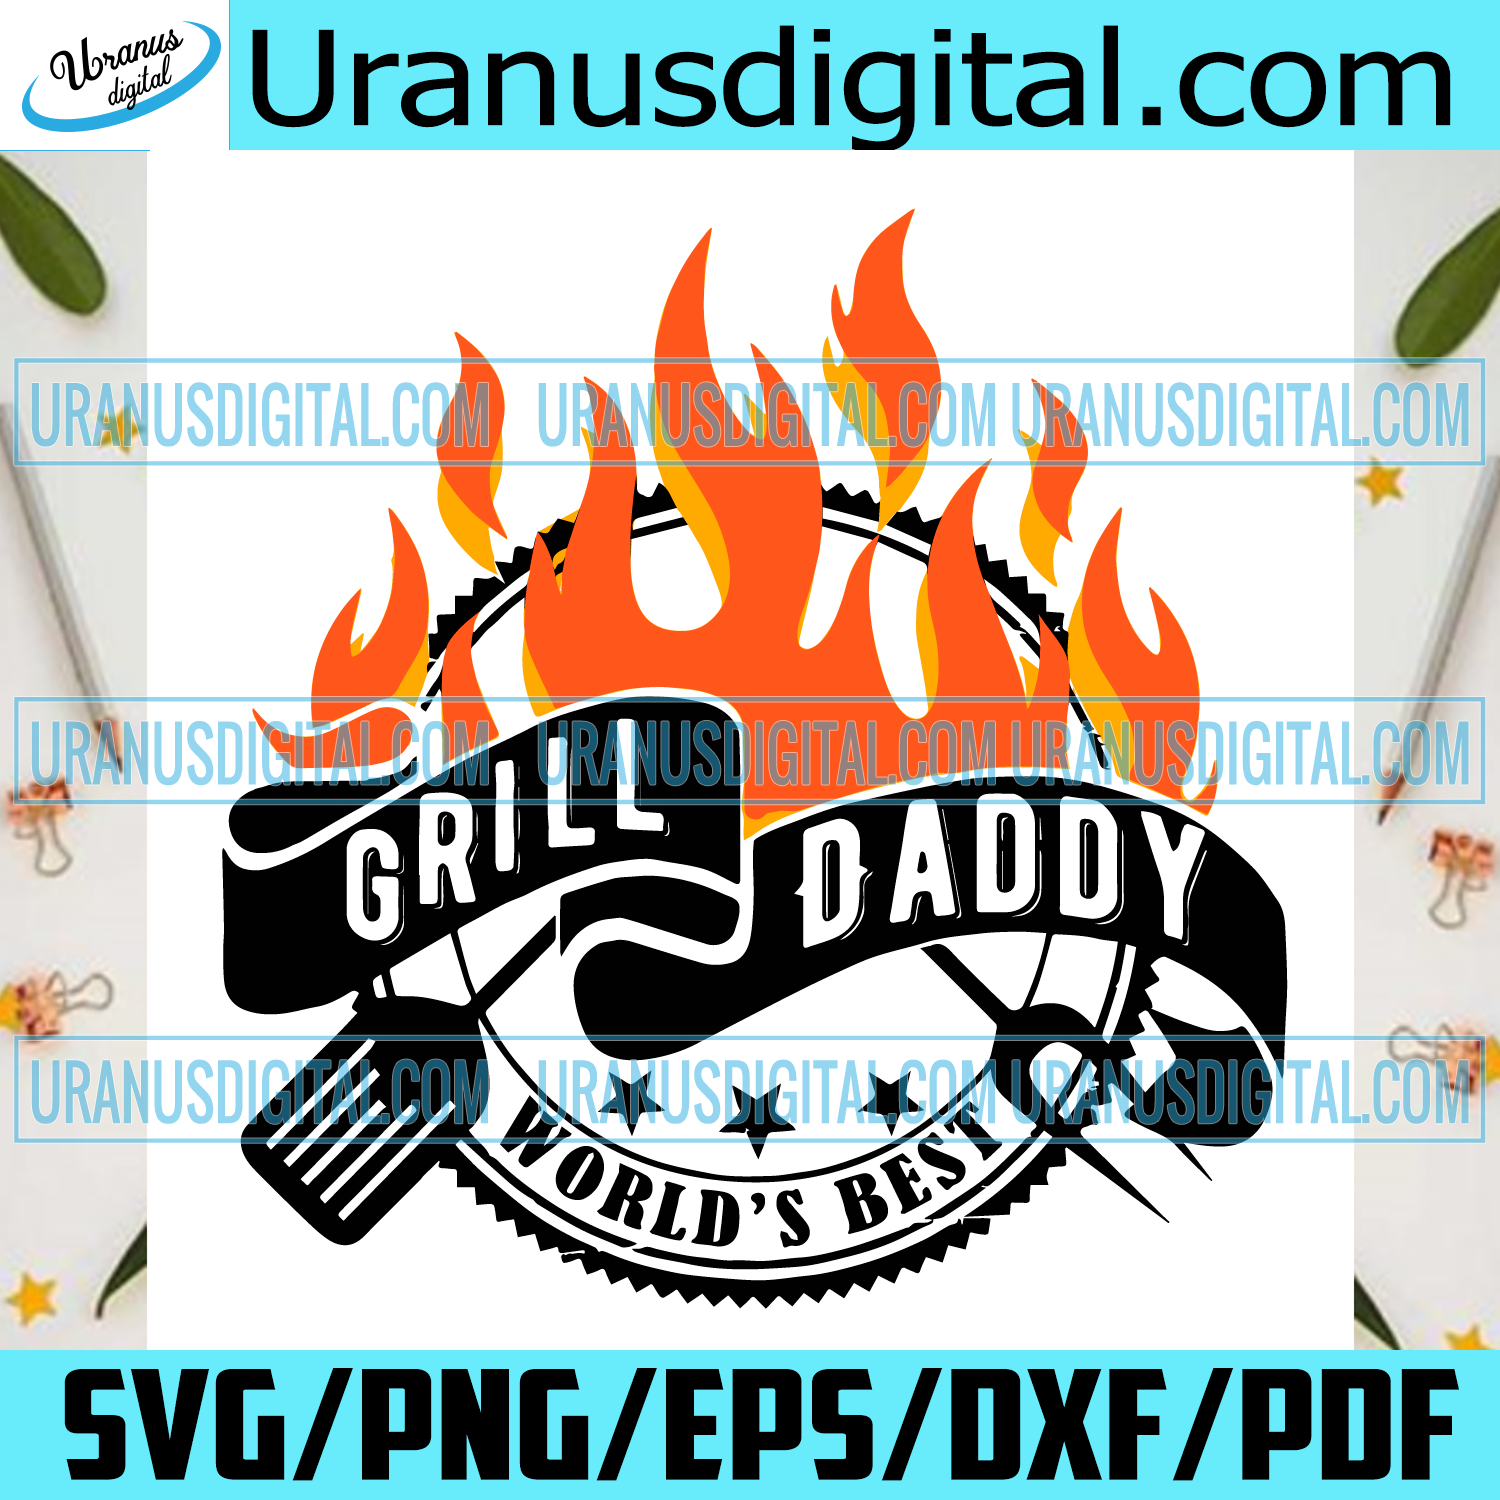 Download Grill Daddy Worlds Best Svg Fathers Day Svg Grill Daddy Svg Daddy S Uranusdigital